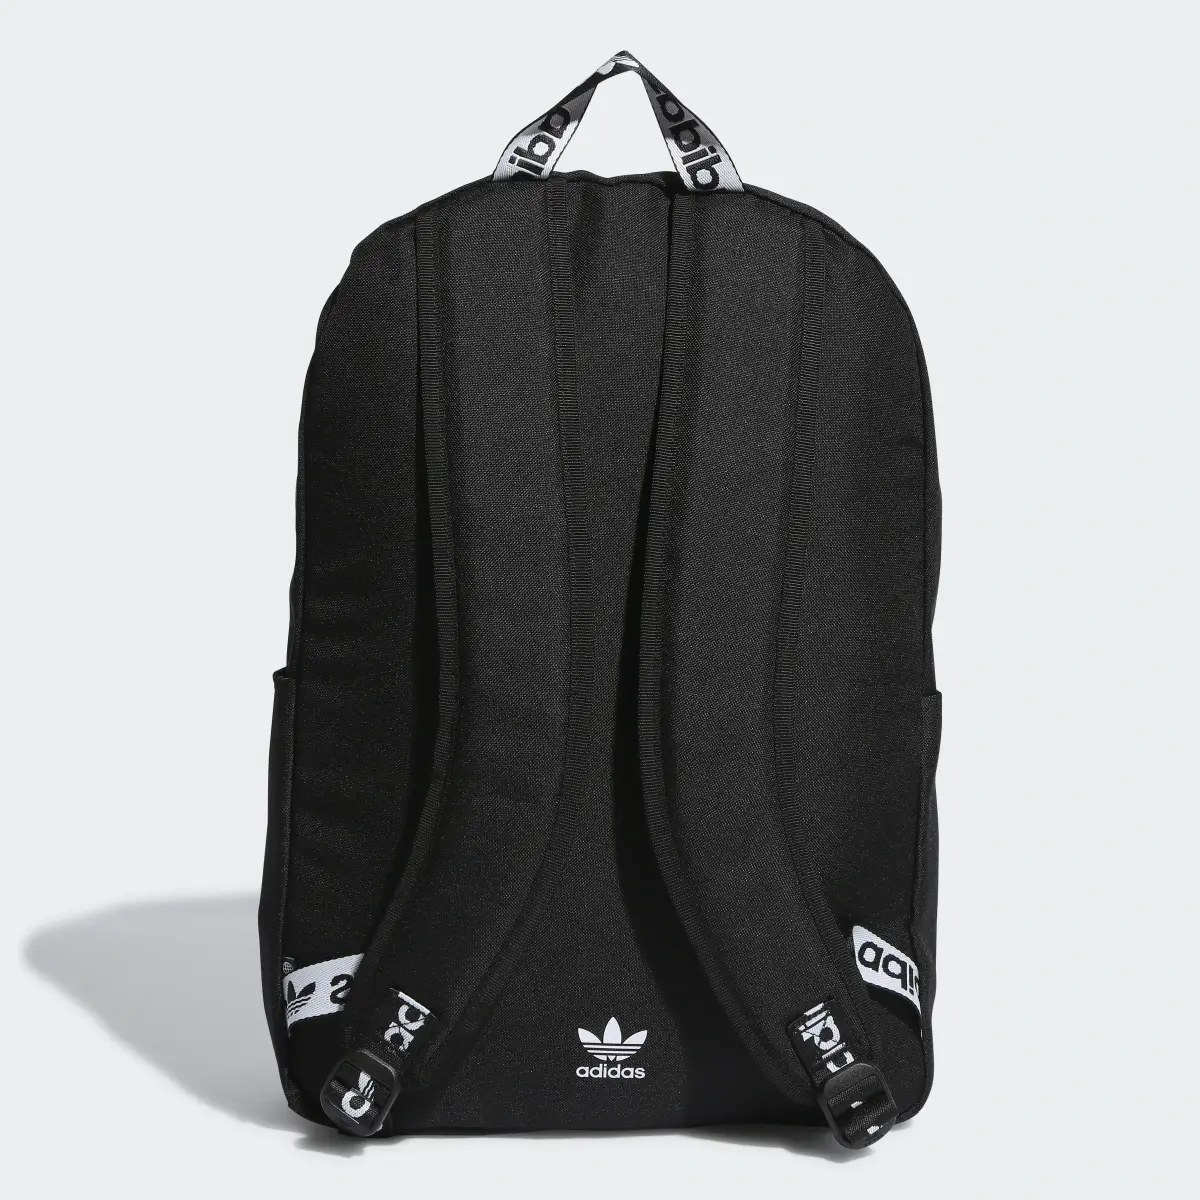 Adidas Trefoil Classic Backpack. 3